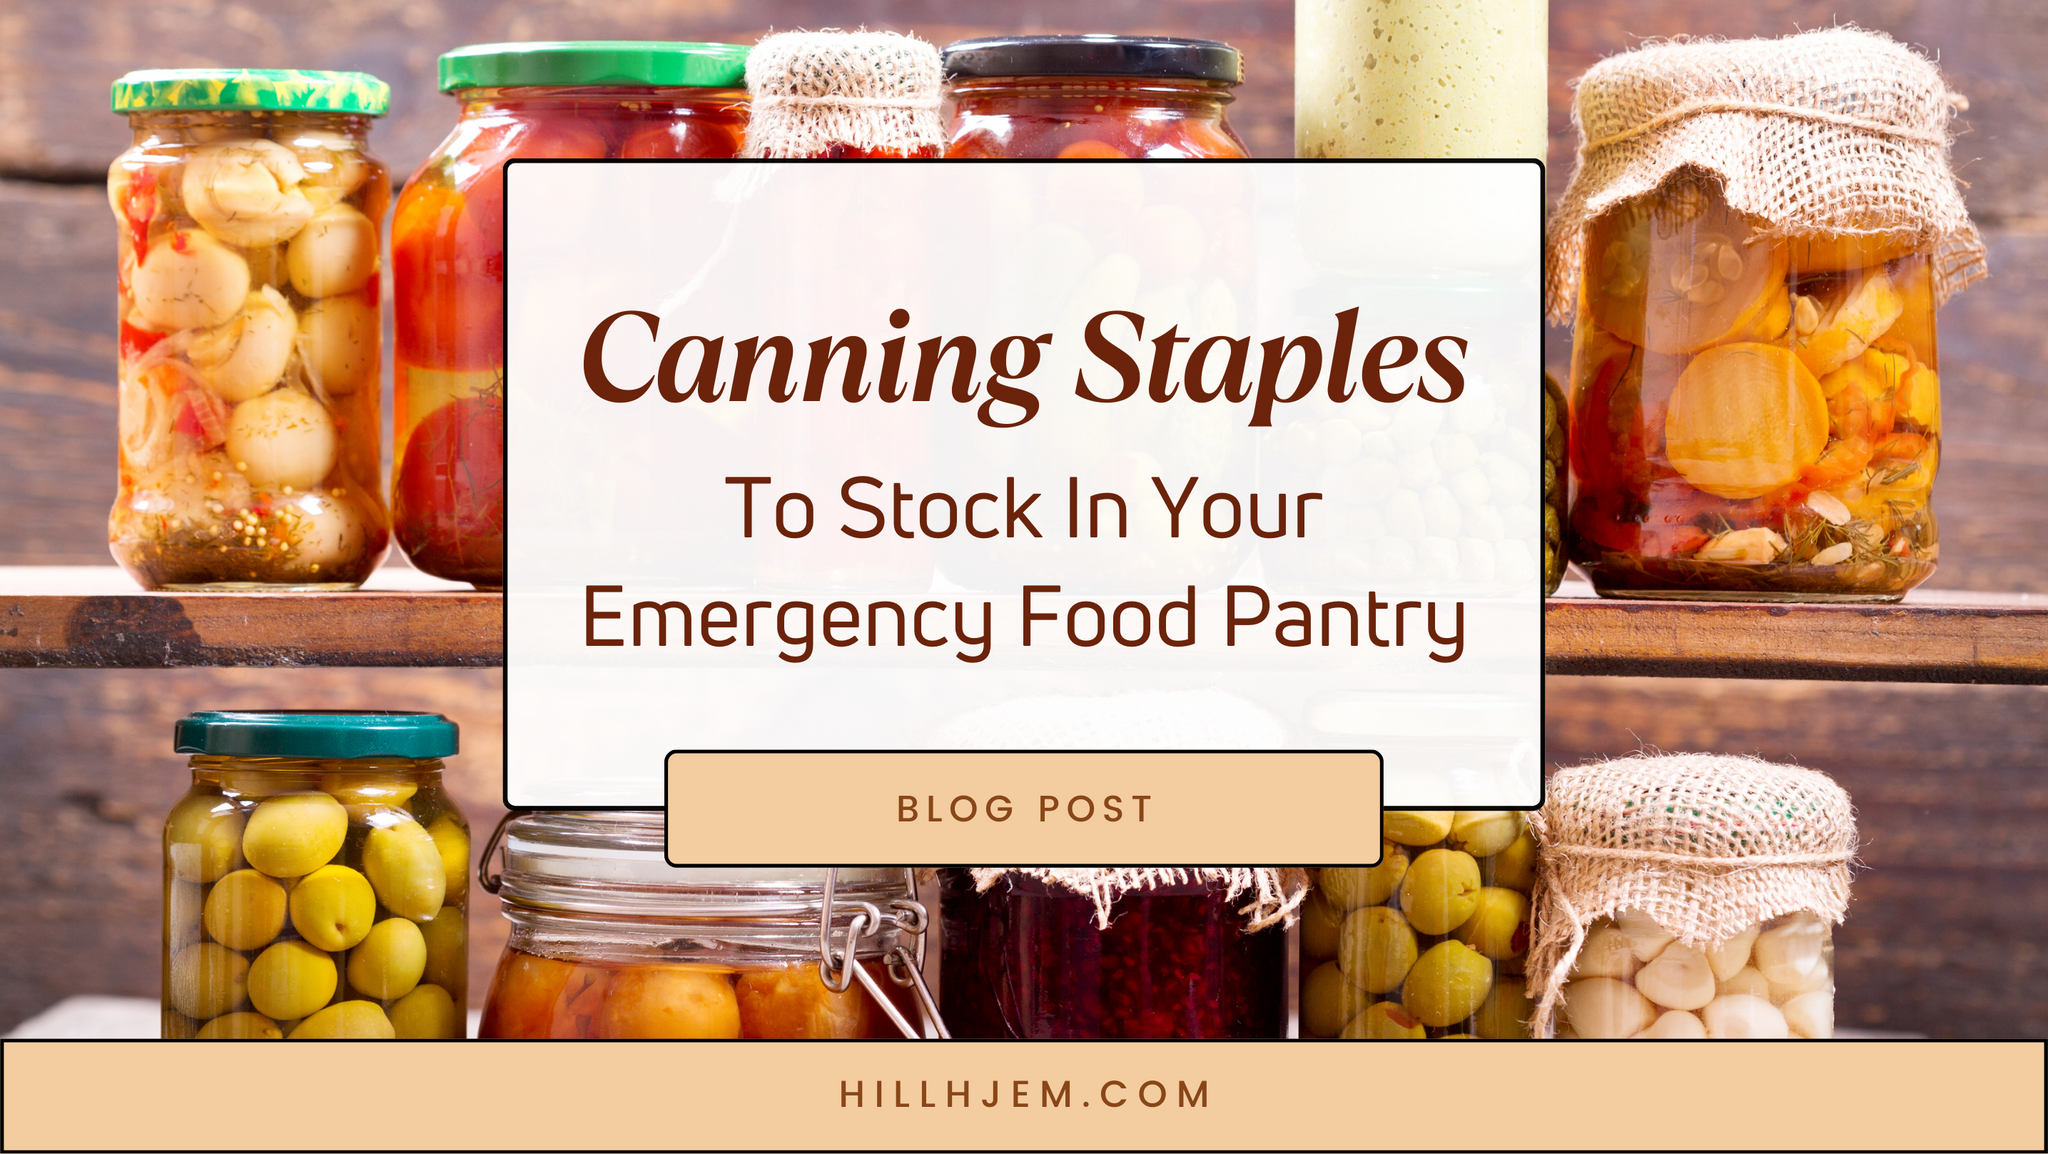 Canning Staples To Stock In Your Emergency Food Pantry